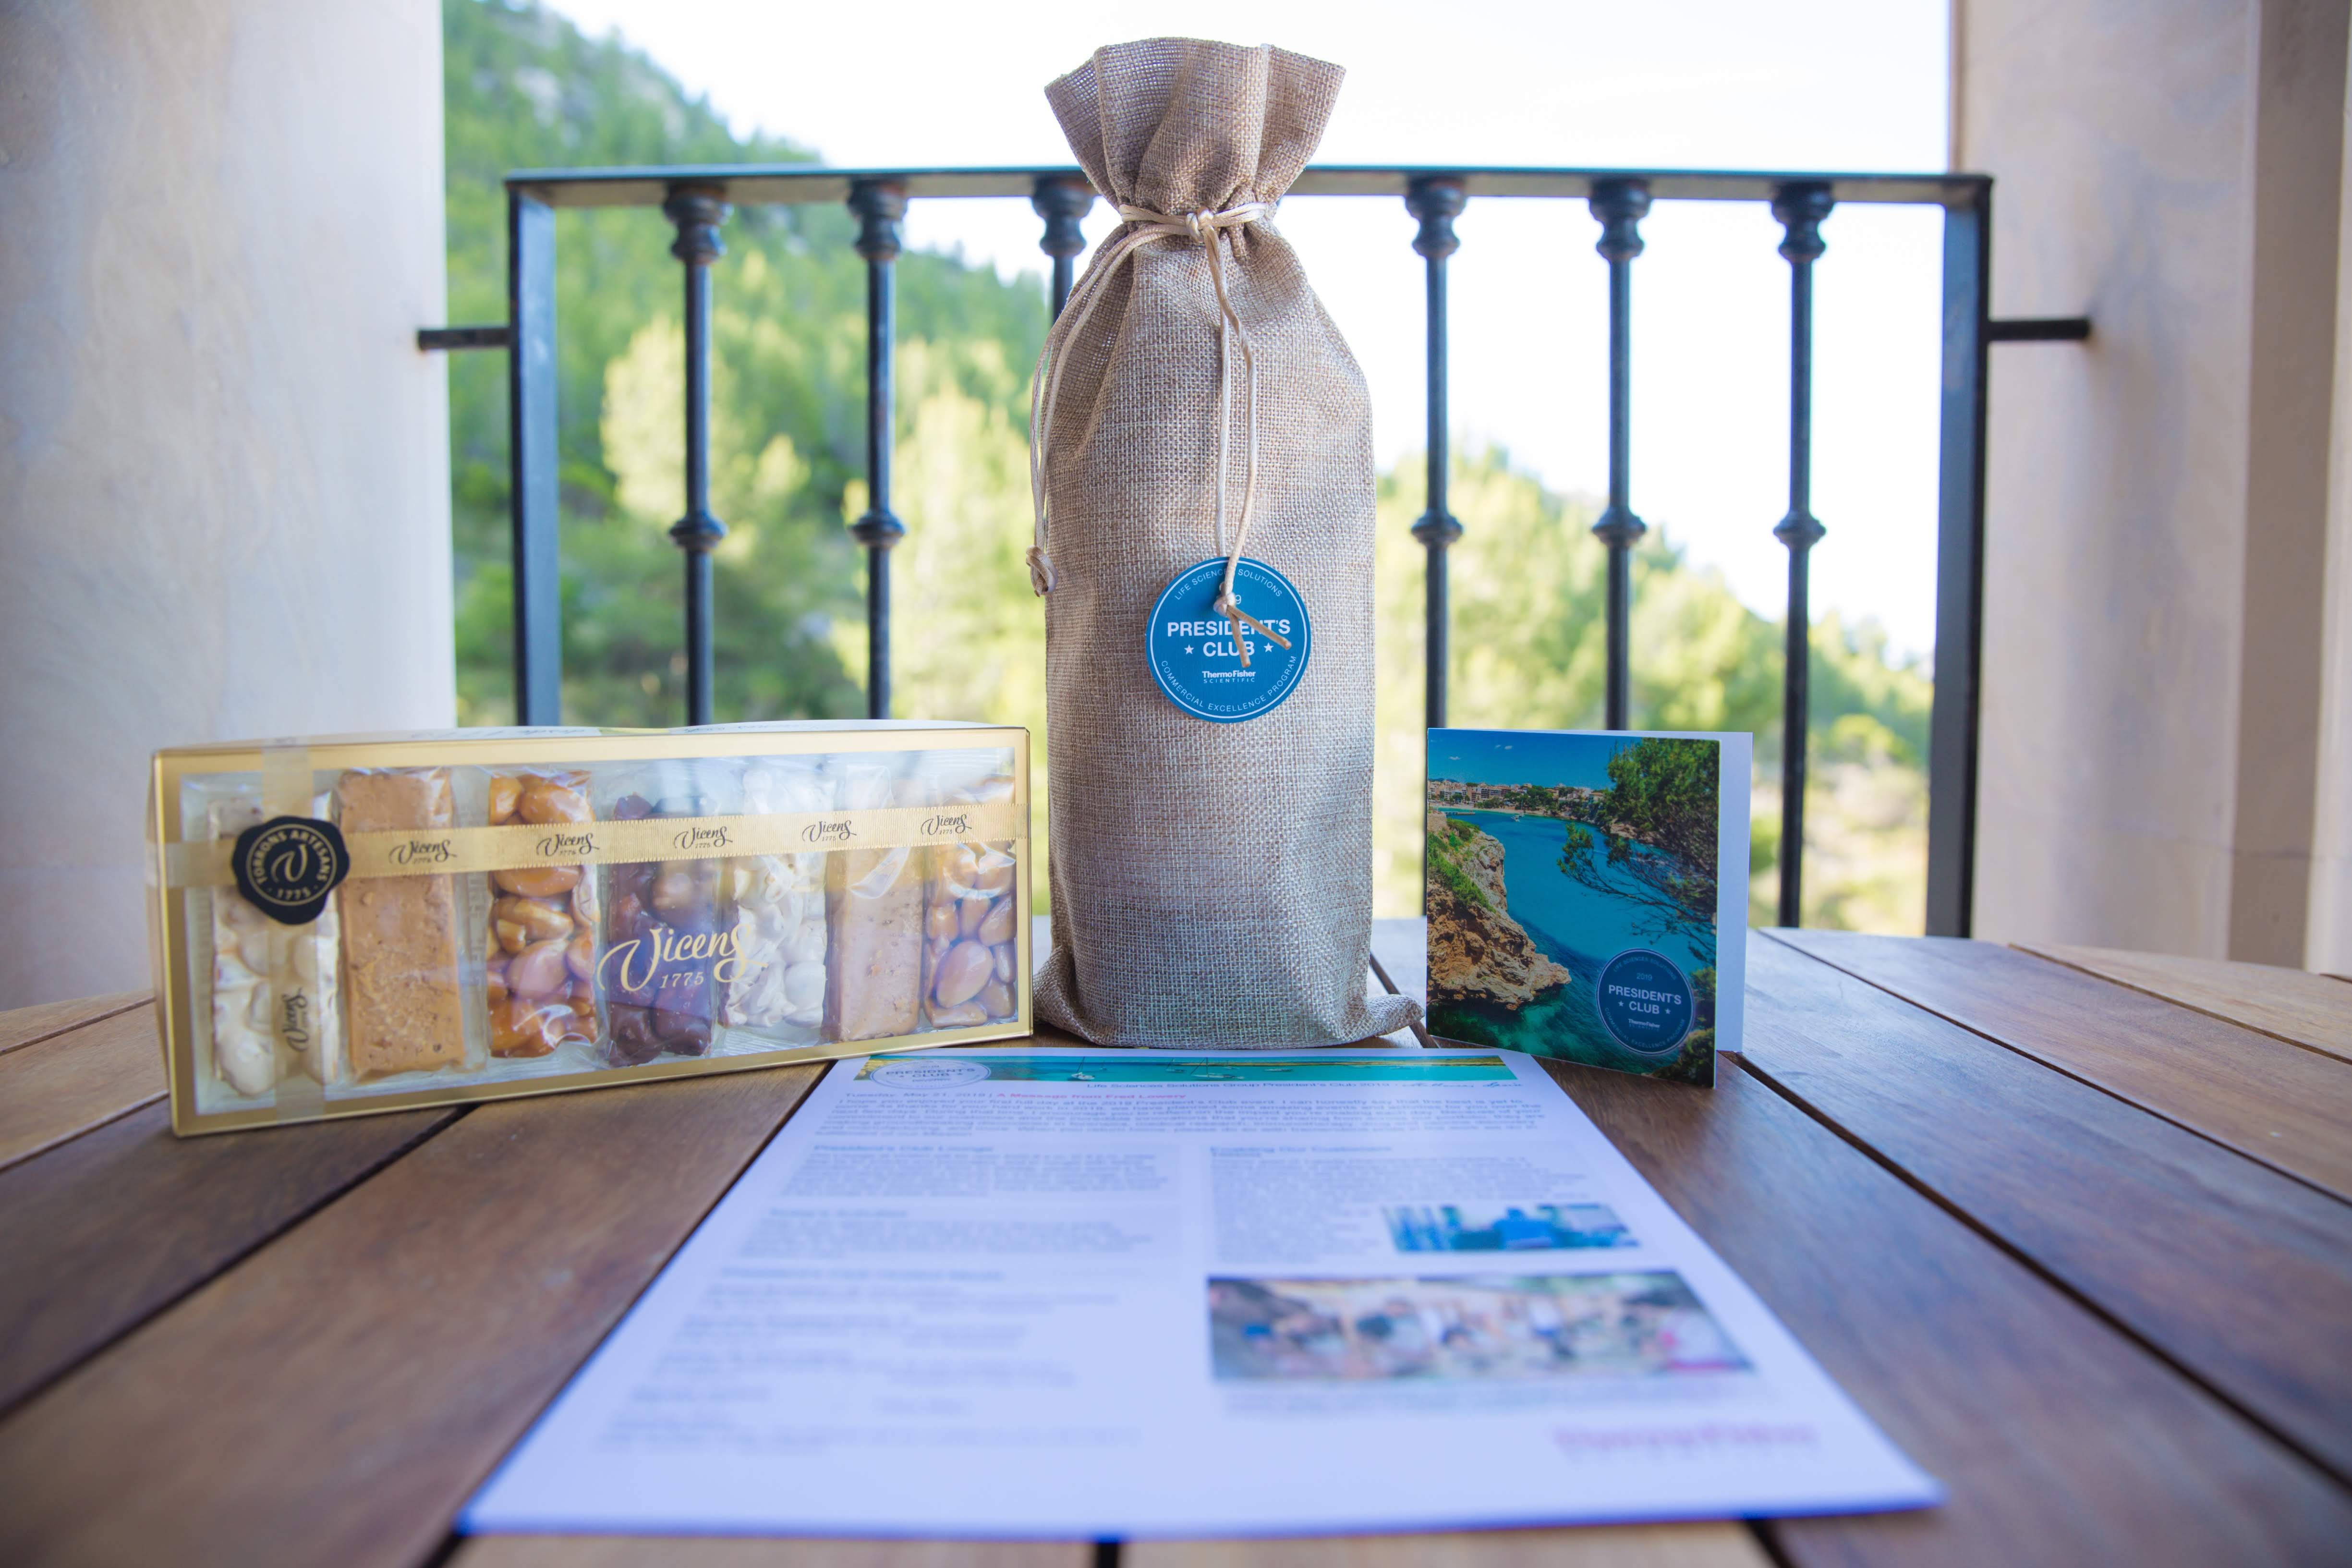 incentive trip event gifting that includes wine bottle in cover, local sweets and card